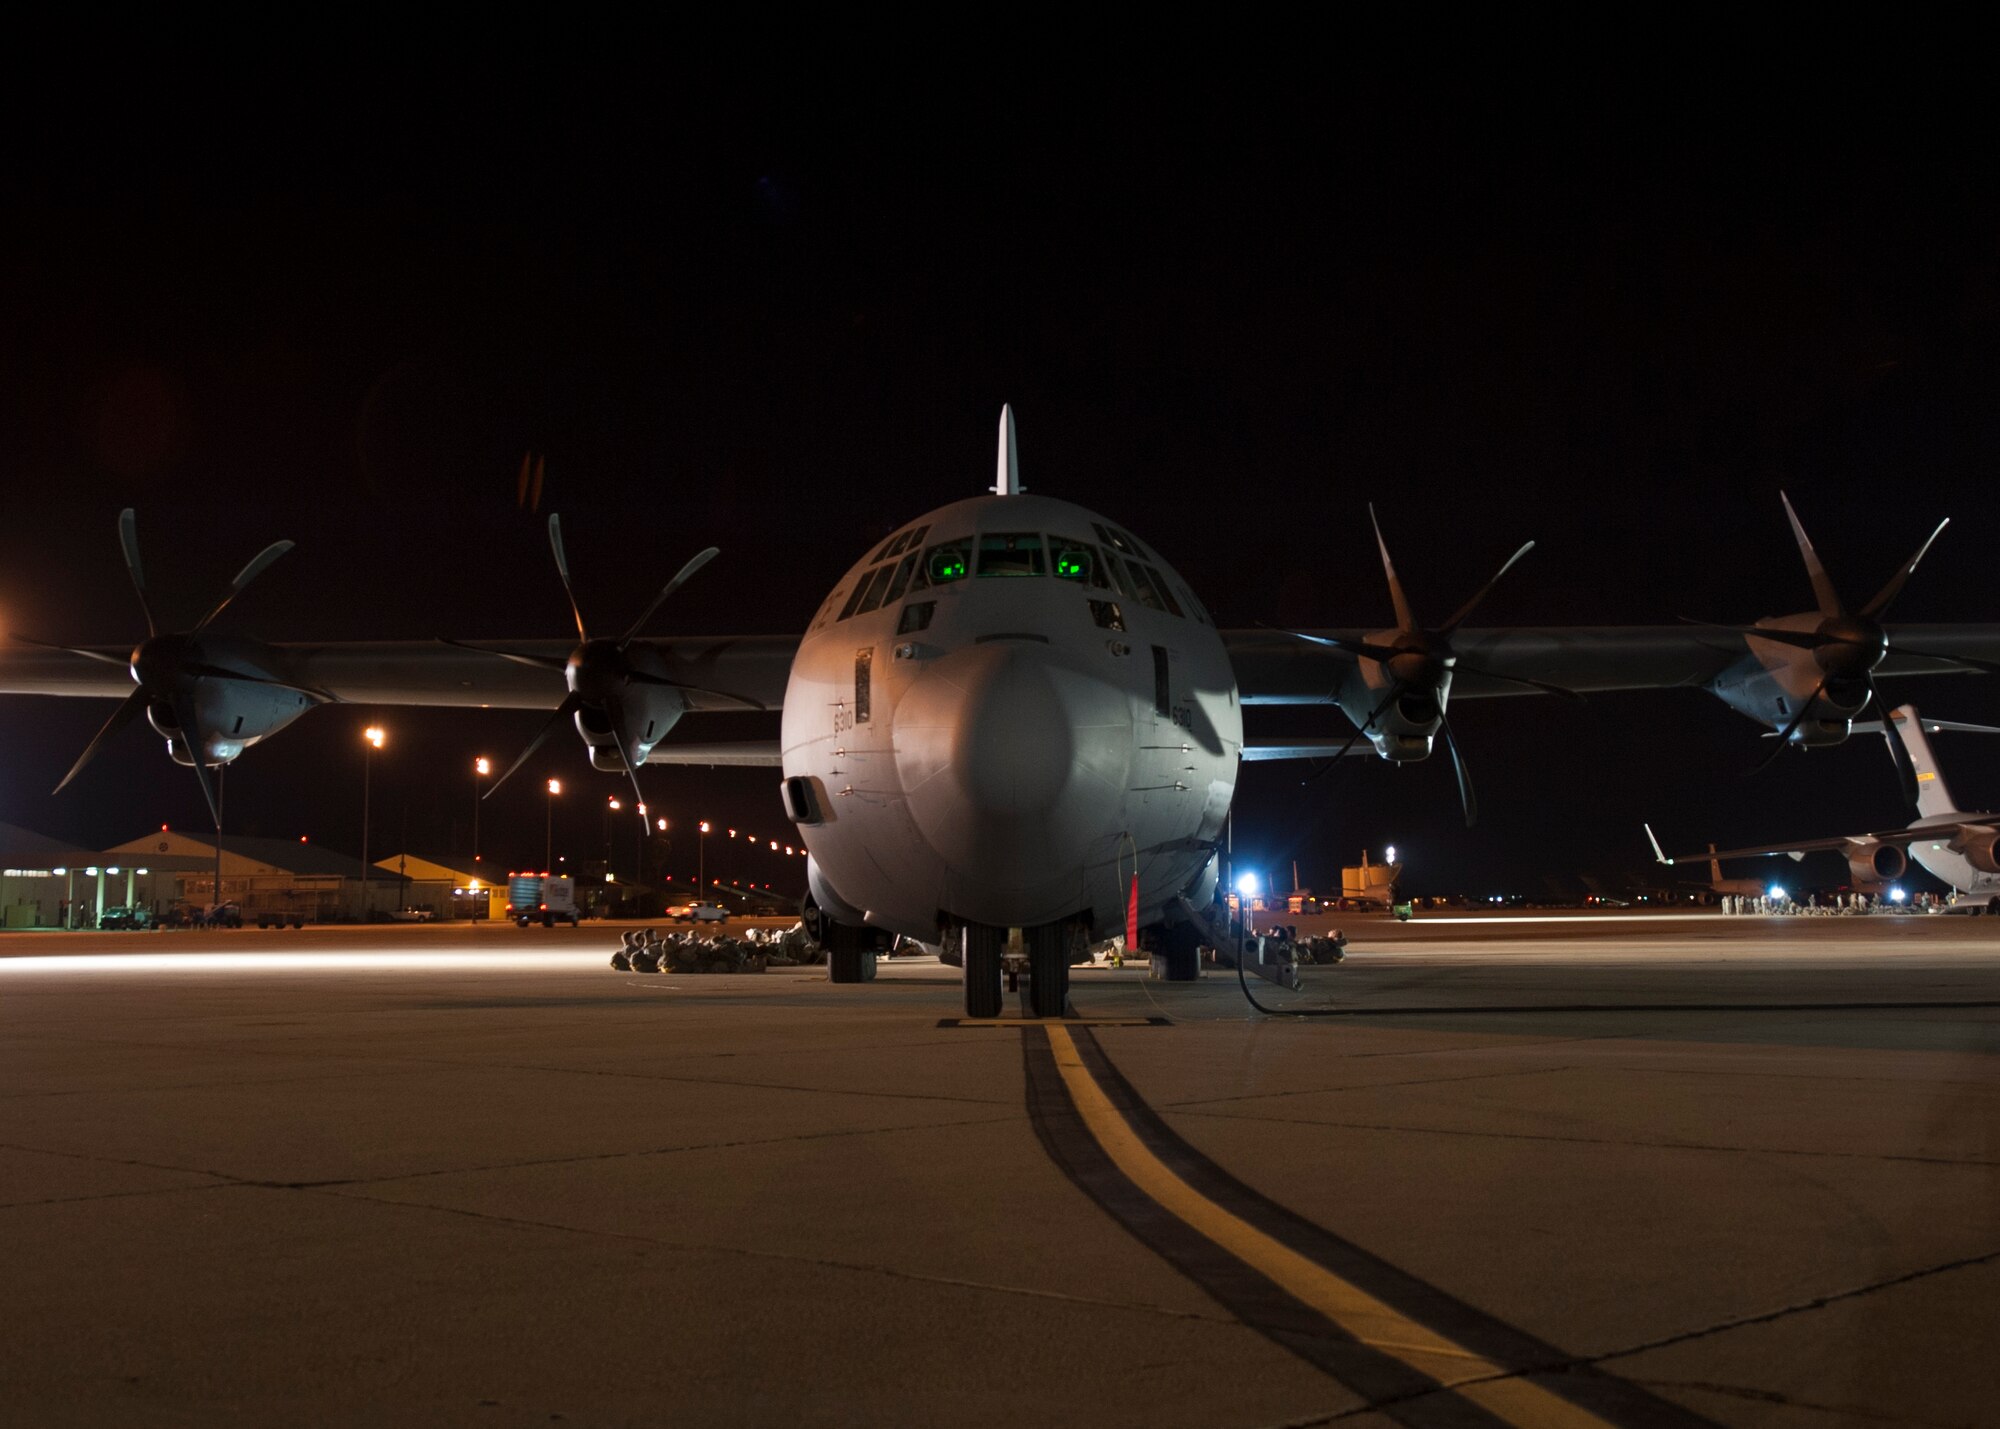 A C-130J sits on the flightline Aug. 6, 2015, at March Air Reserve Base, Calif. Twenty aircraft including C-130’s and C-17’s were used to drop more than 615 paratroopers and deliver Army assets such as 28 militarized all-terrain vehicles, 18 armored vehicles and two M142 high mobility artillery rocket systems. (U.S. Air Force photo by Senior Airman Scott Poe)